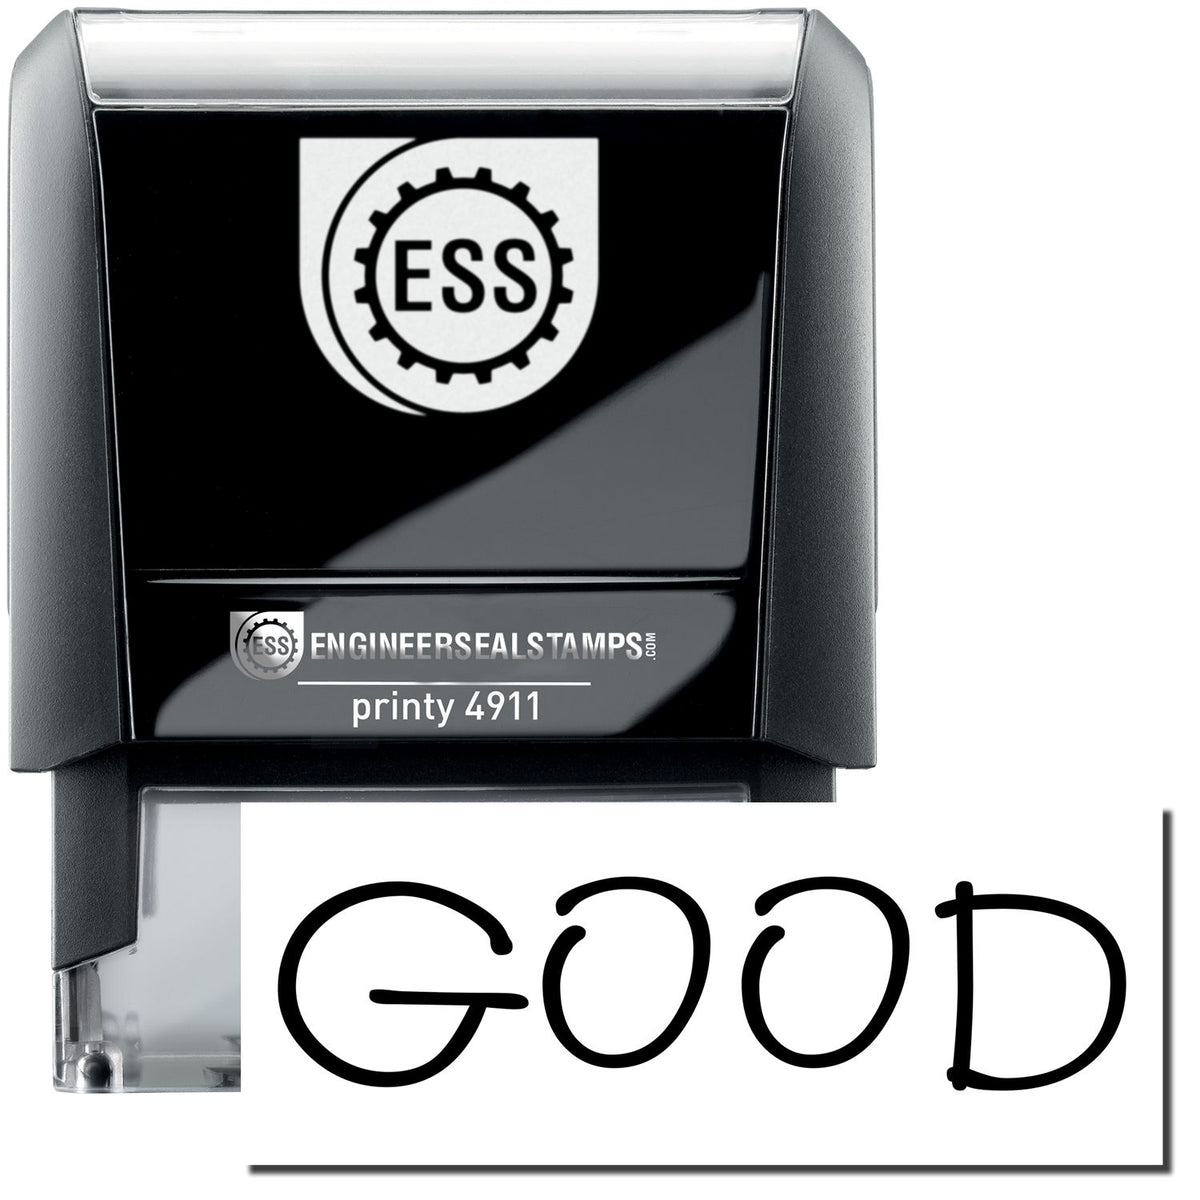 A self-inking stamp with a stamped image showing how the text &quot;GOOD&quot; is displayed after stamping.